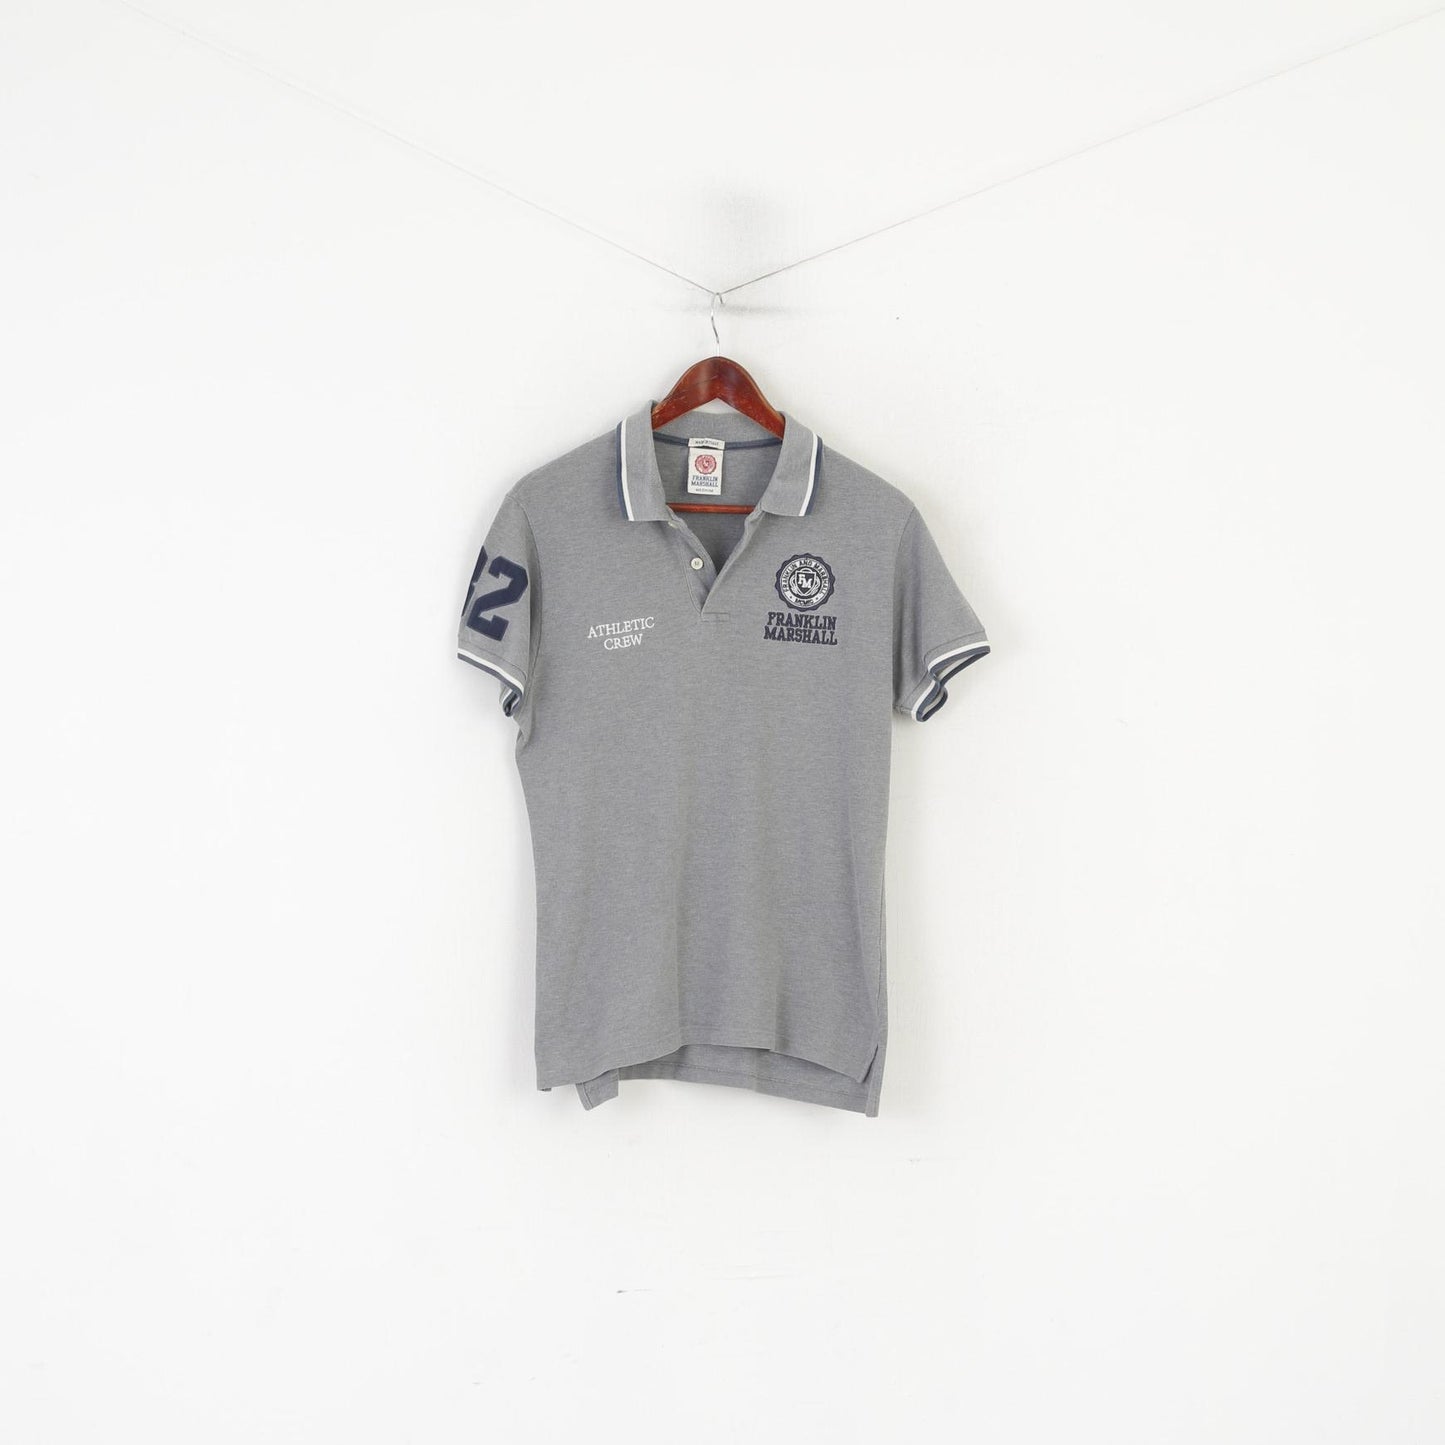 Franklin Marshall Hommes M Polo Gris Coton Athletic Crew #82 Slim Fit Top